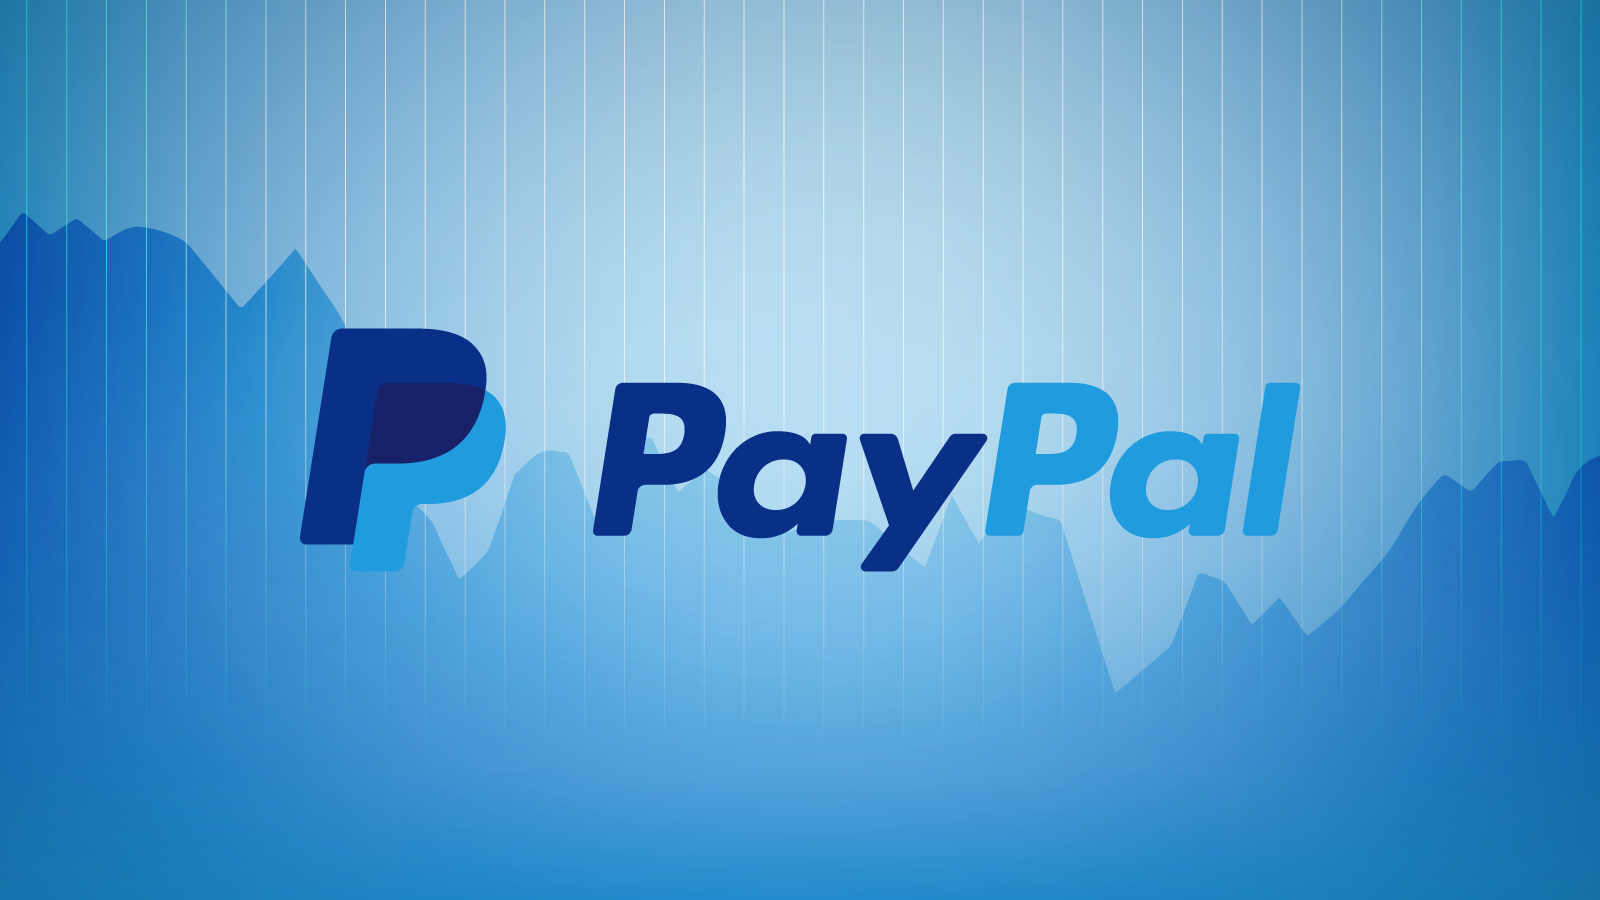 PayPal Mergers and Acquisitions: